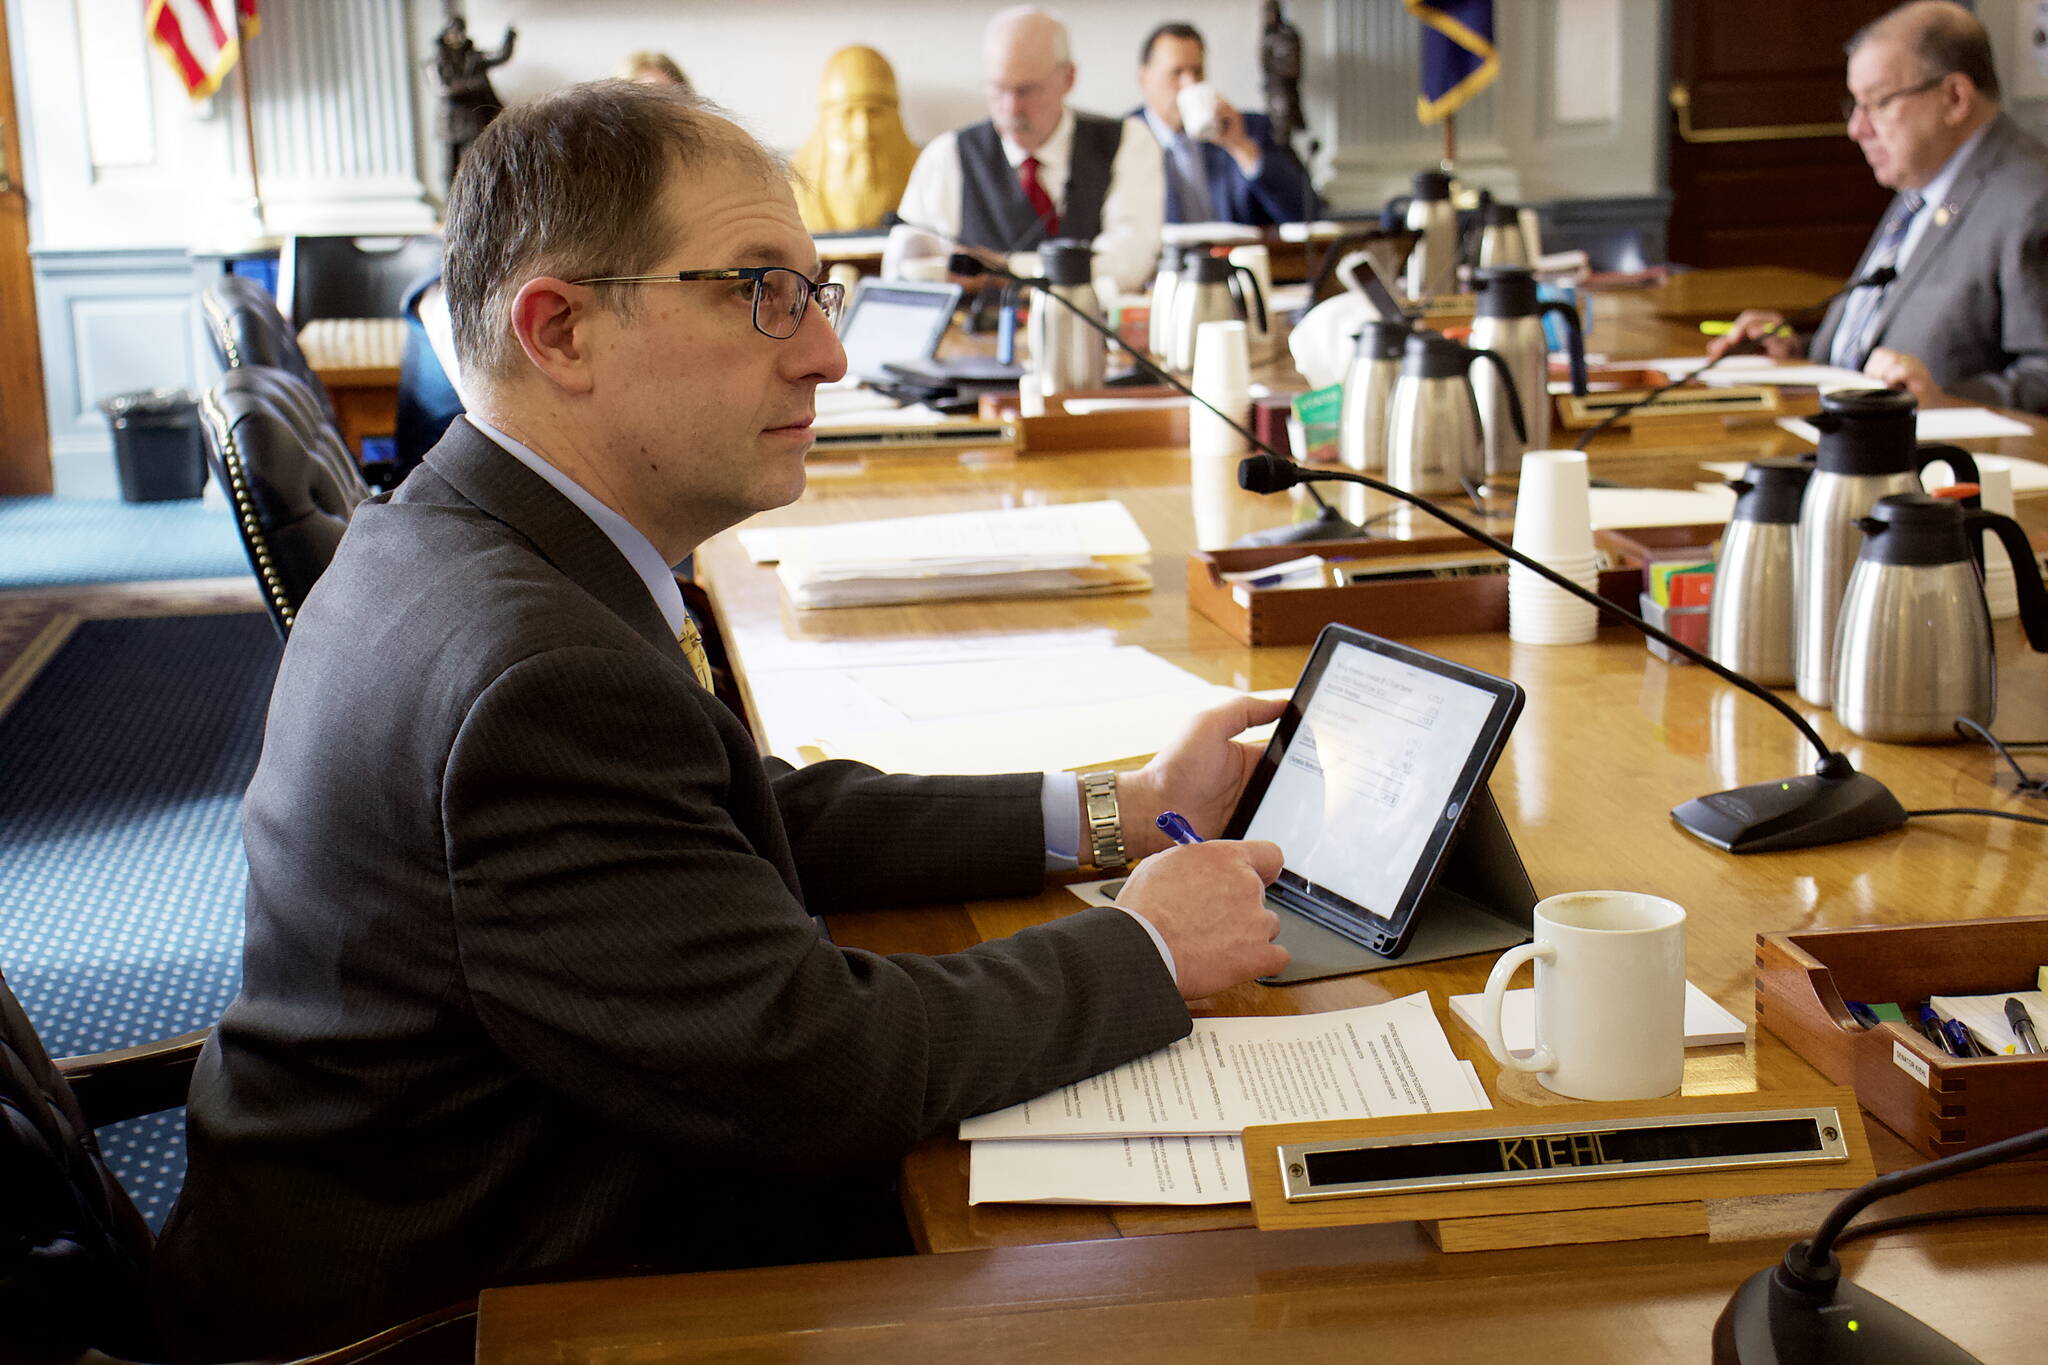 State Sen. Jesse Kiehl, D-Juneau, listens to an overview of the state’s balance sheet under a proposed budget for next year introduced by the Senate Finance Committee during a hearing Wednesday. The budget contains a surplus of more than $1.4 billion, but that’s a misleading number since it doesn’t include Permanent Fund Dividends, an increase in education funding and other spending that are virtually certain to be added following public testimony during the next couple of days. (Mark Sabbatini / Juneau Empire)